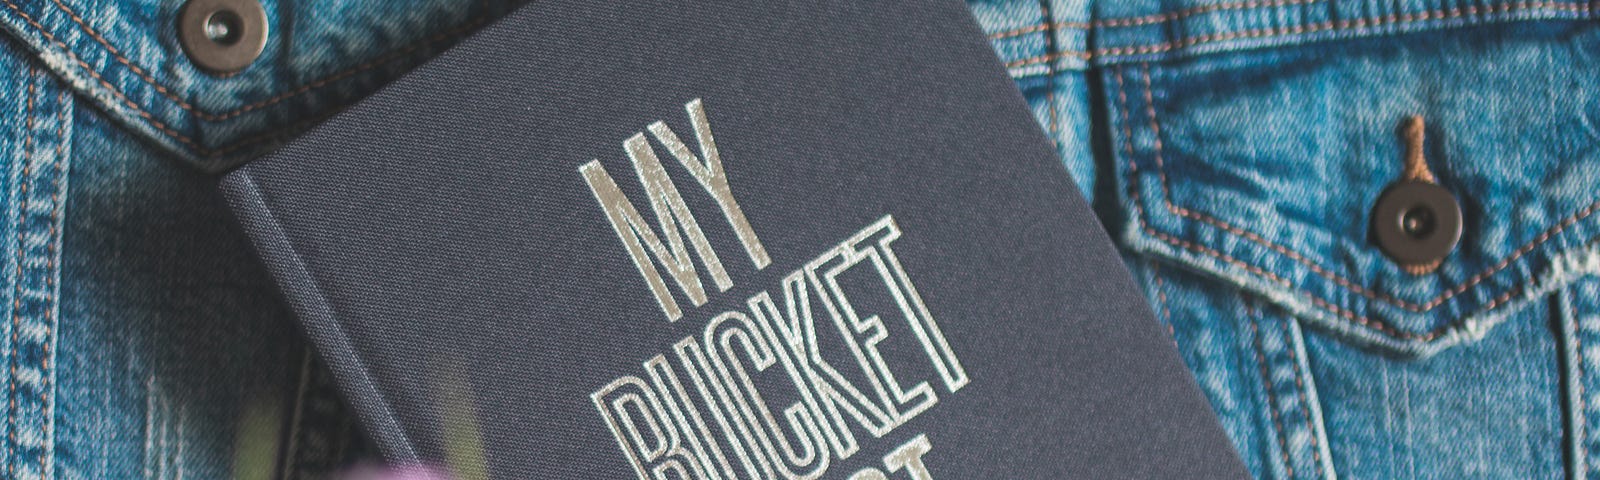 Image of a bucket list lying on a jean jacket with blurry flowers in the foreground.